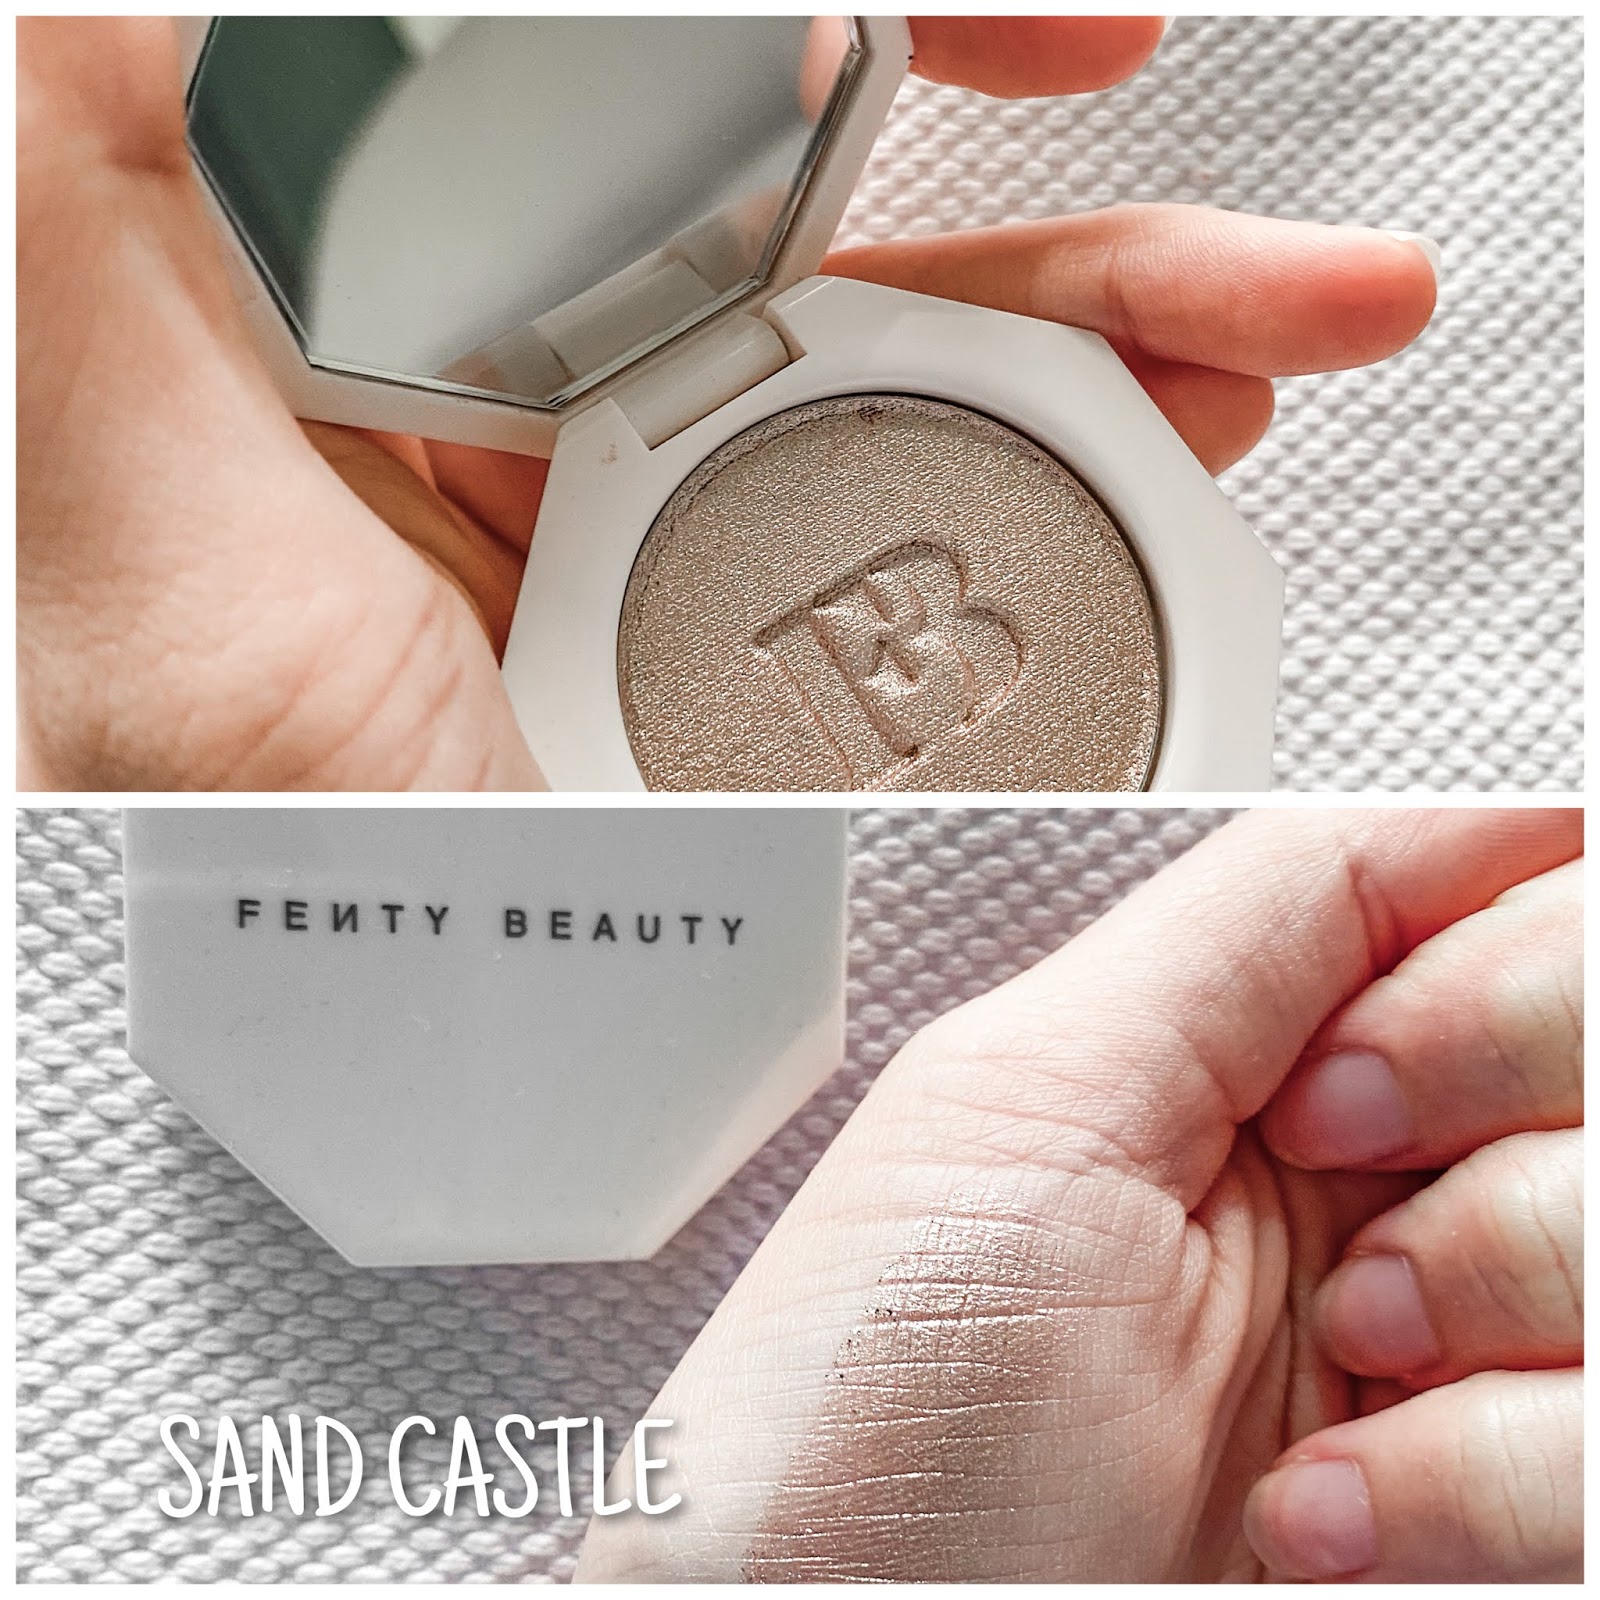 Fenty Beauty Mini Makeup Sets Review: Bomb Baby Lip And Face Set, Lil  Bronze Duo Mini Bronzer Set & More! - Faithfullyours